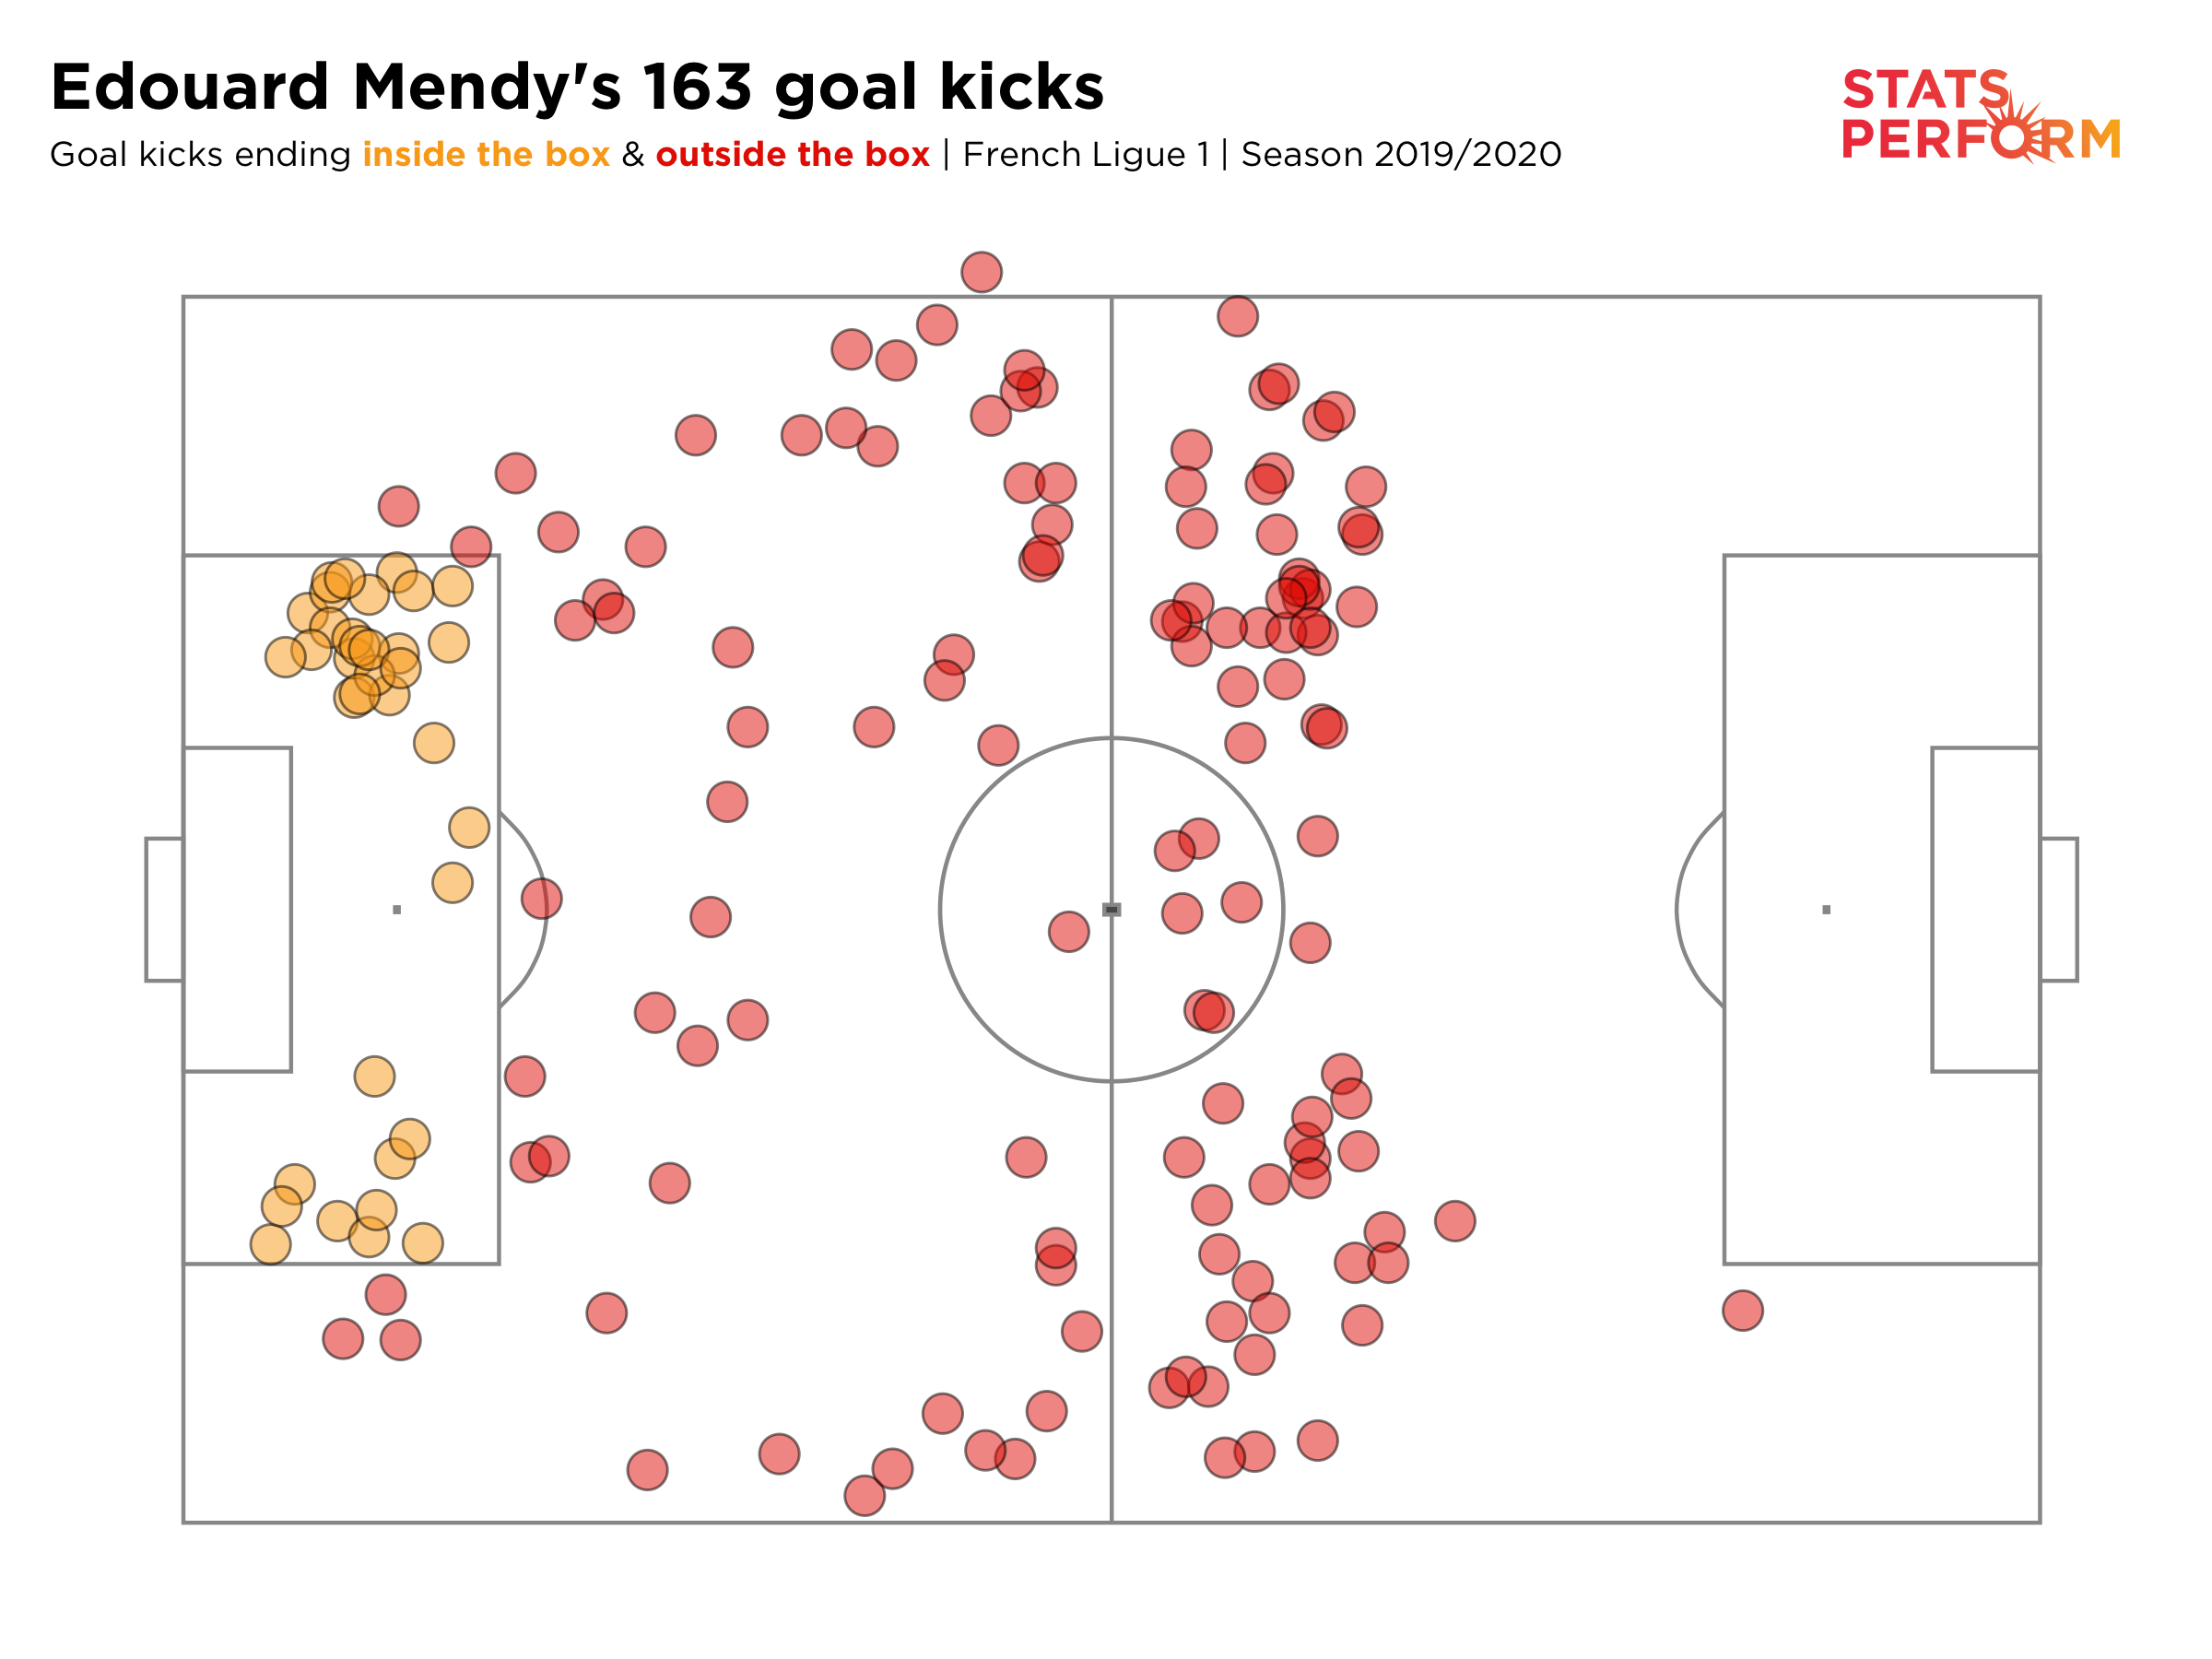 The end point of Edouard Mendy's goal-kicks for Rennes in the 2019-20 Ligue 1 season